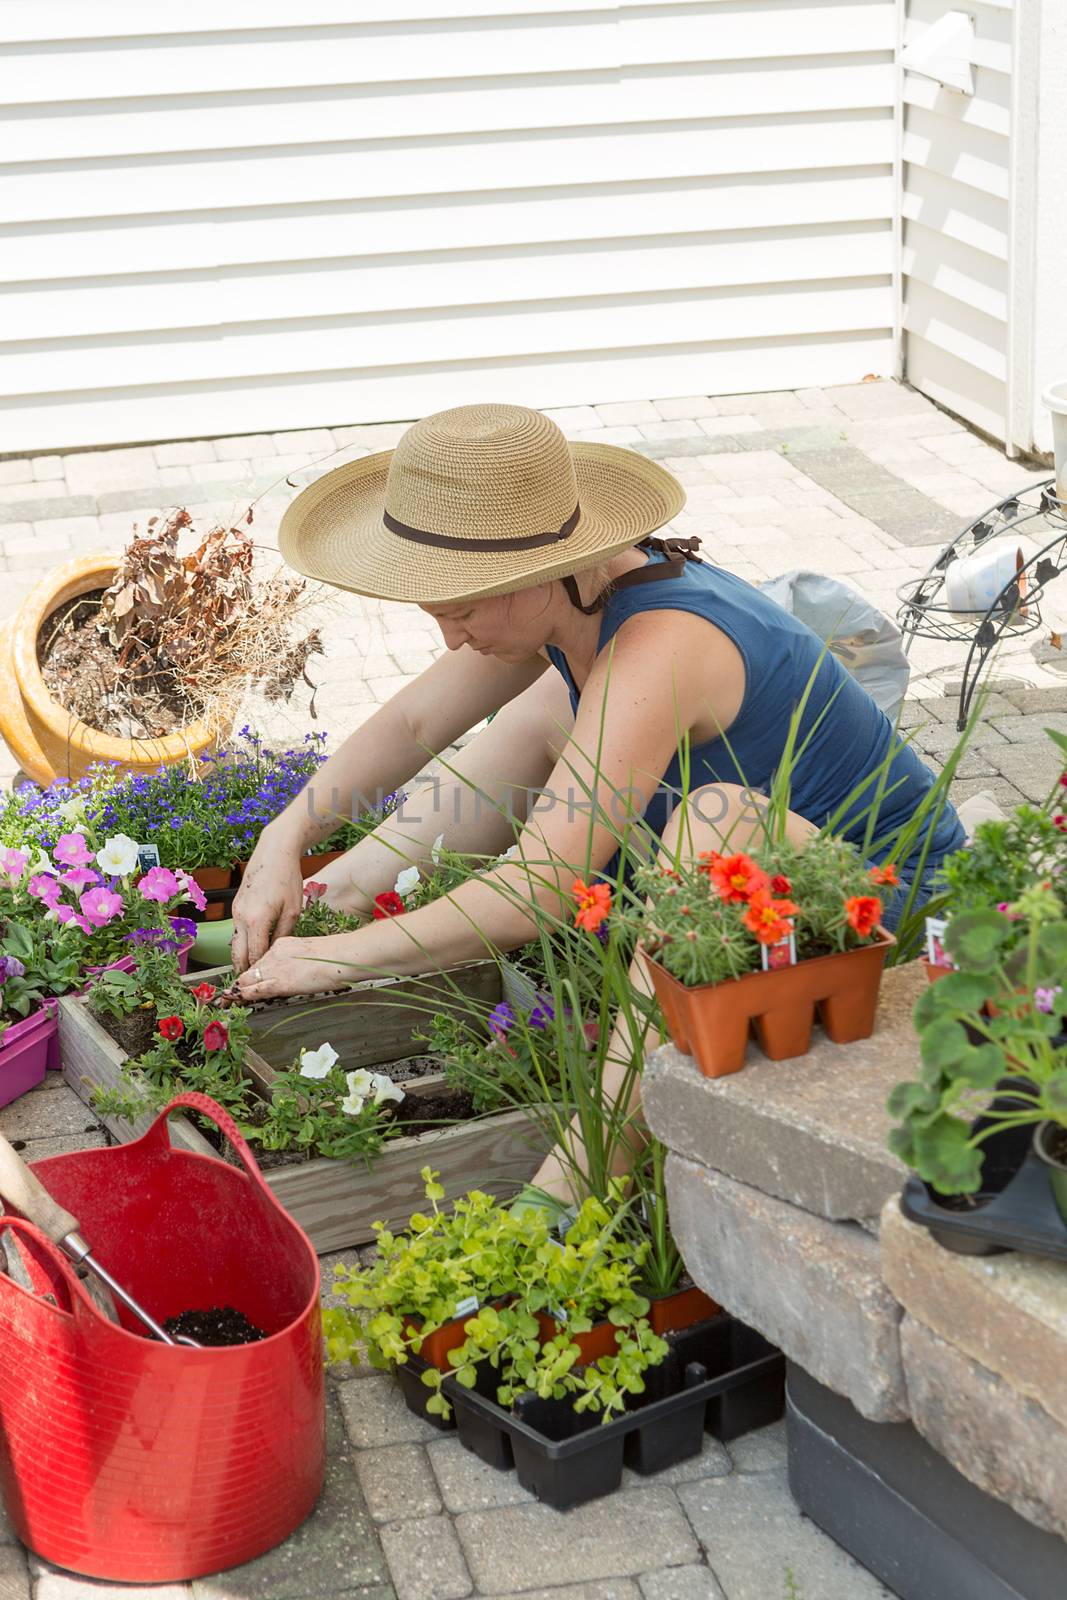 Attractive woman potting up nursery seedlings into decorative arrangements in flowerpots to enhance her home and patio on a hot spring day